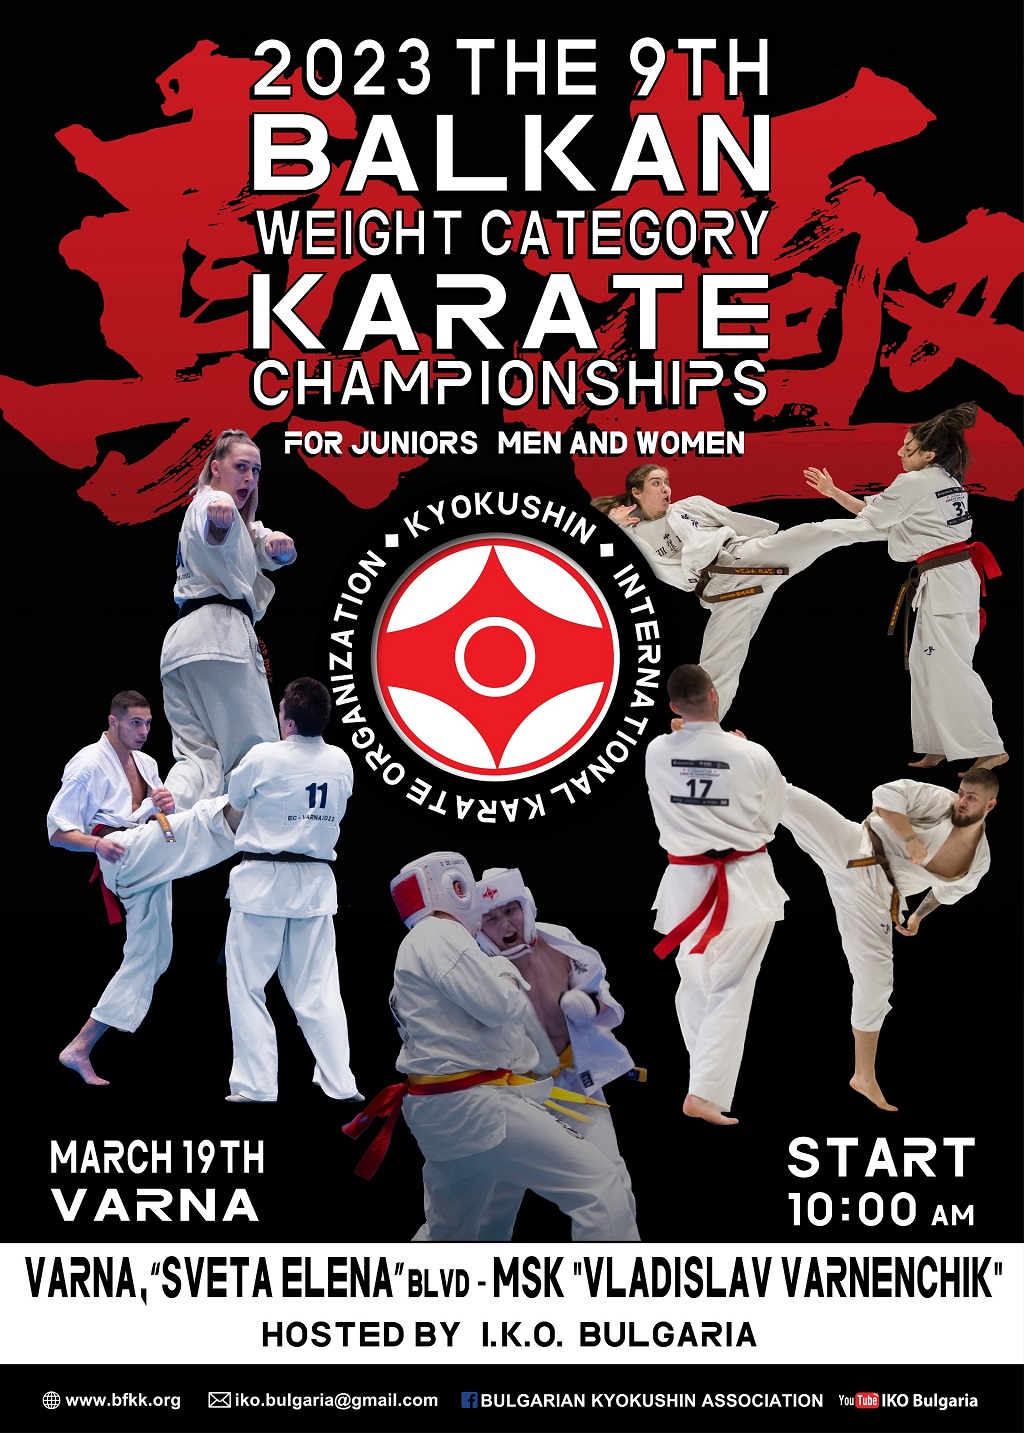 The 9th Balkan Weight Category Karate Championships for juniors, men and women.